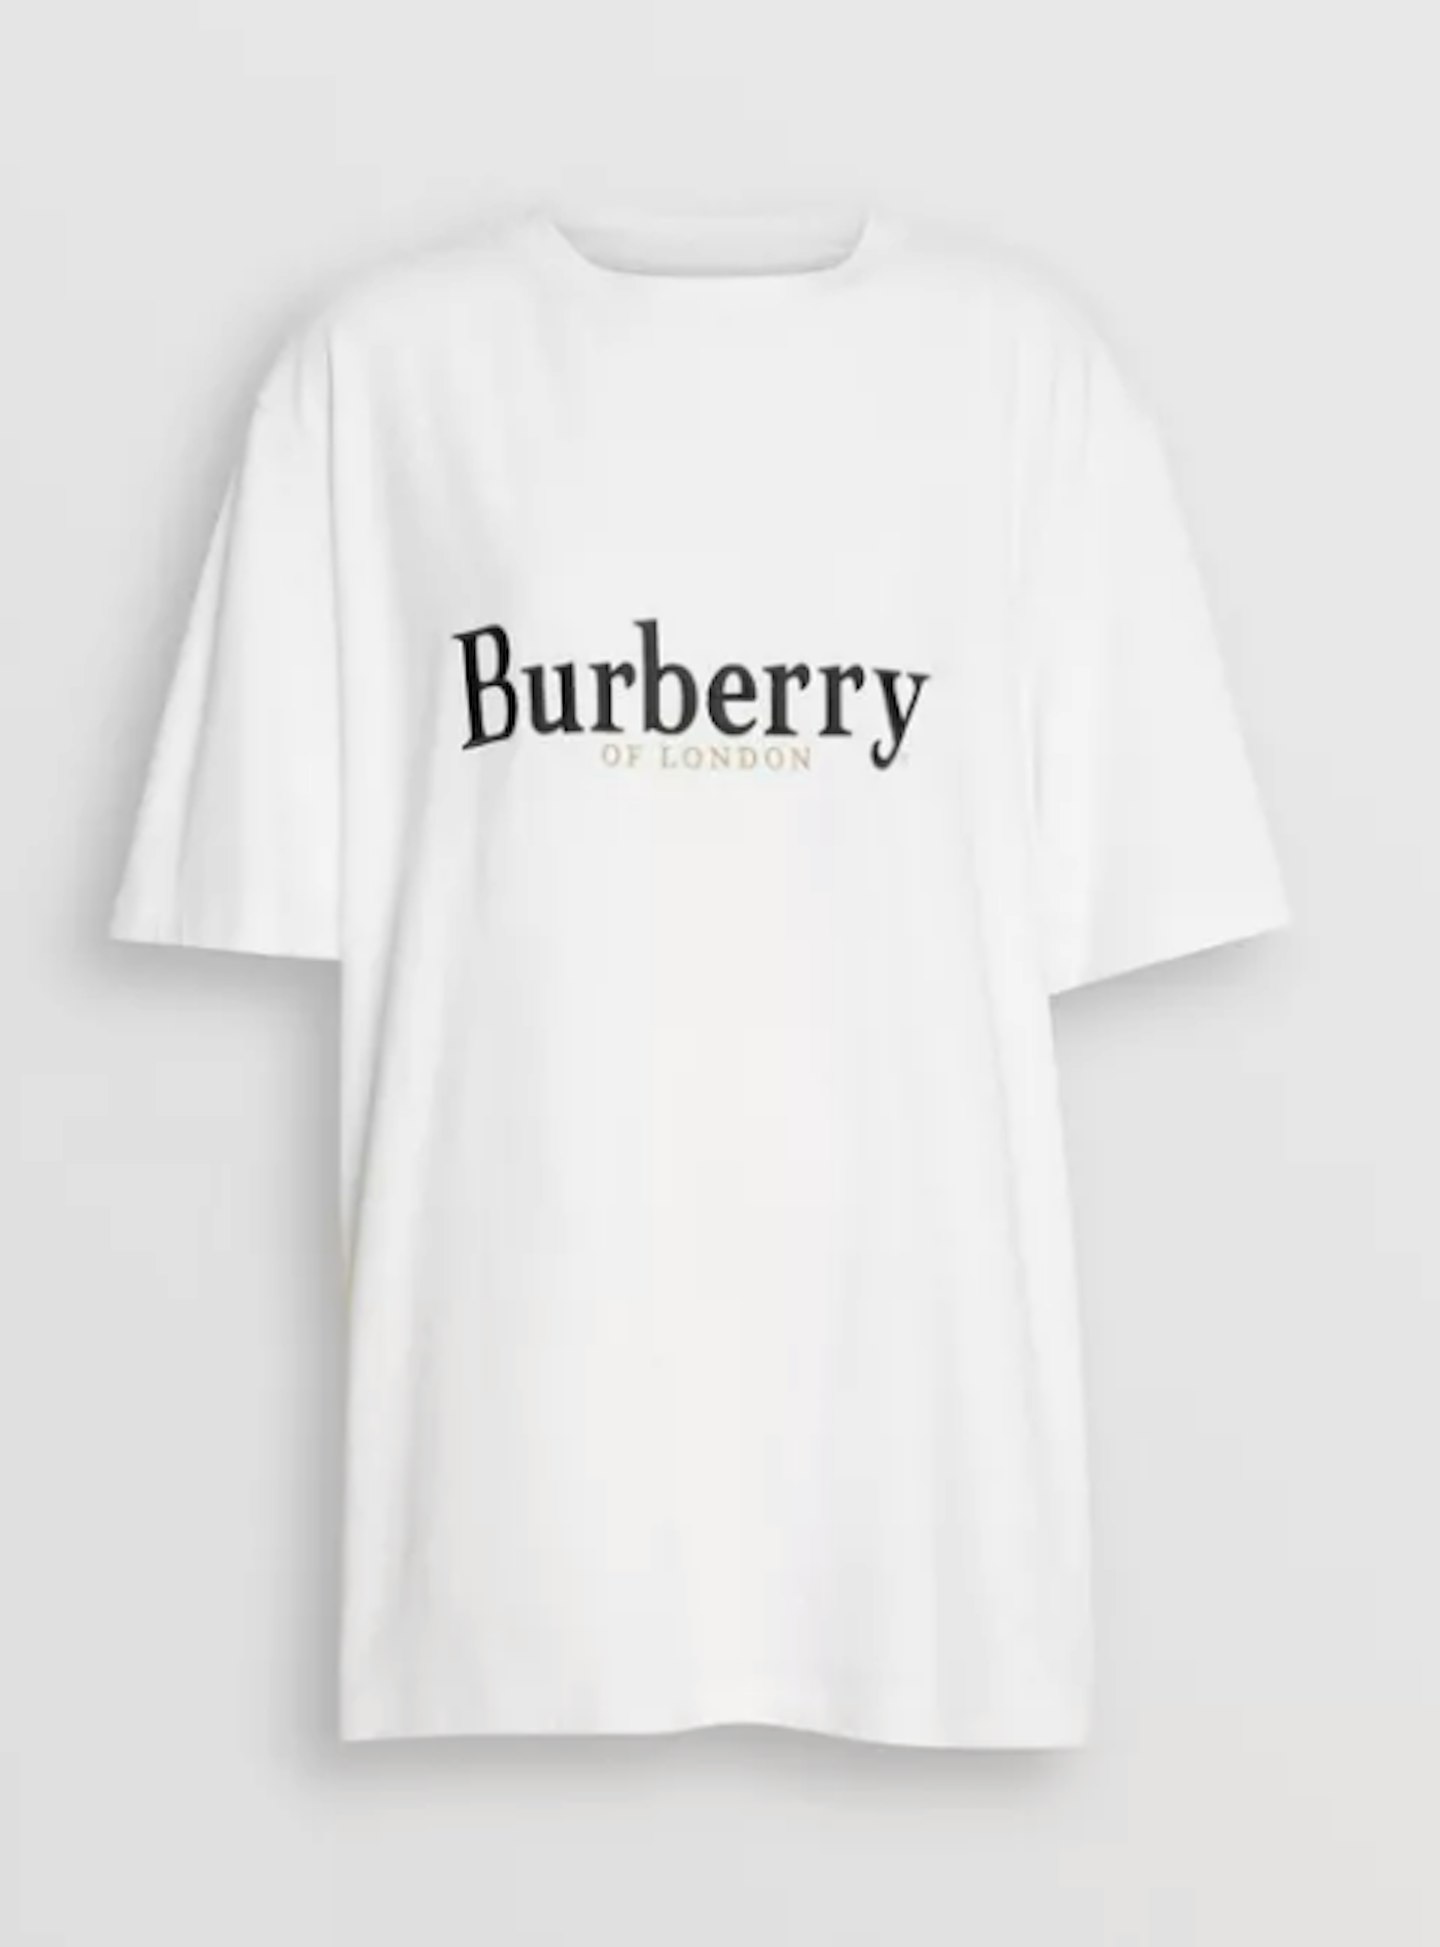 Burberry, Embroidered Archive Logo Cotton T-Shirt, £180